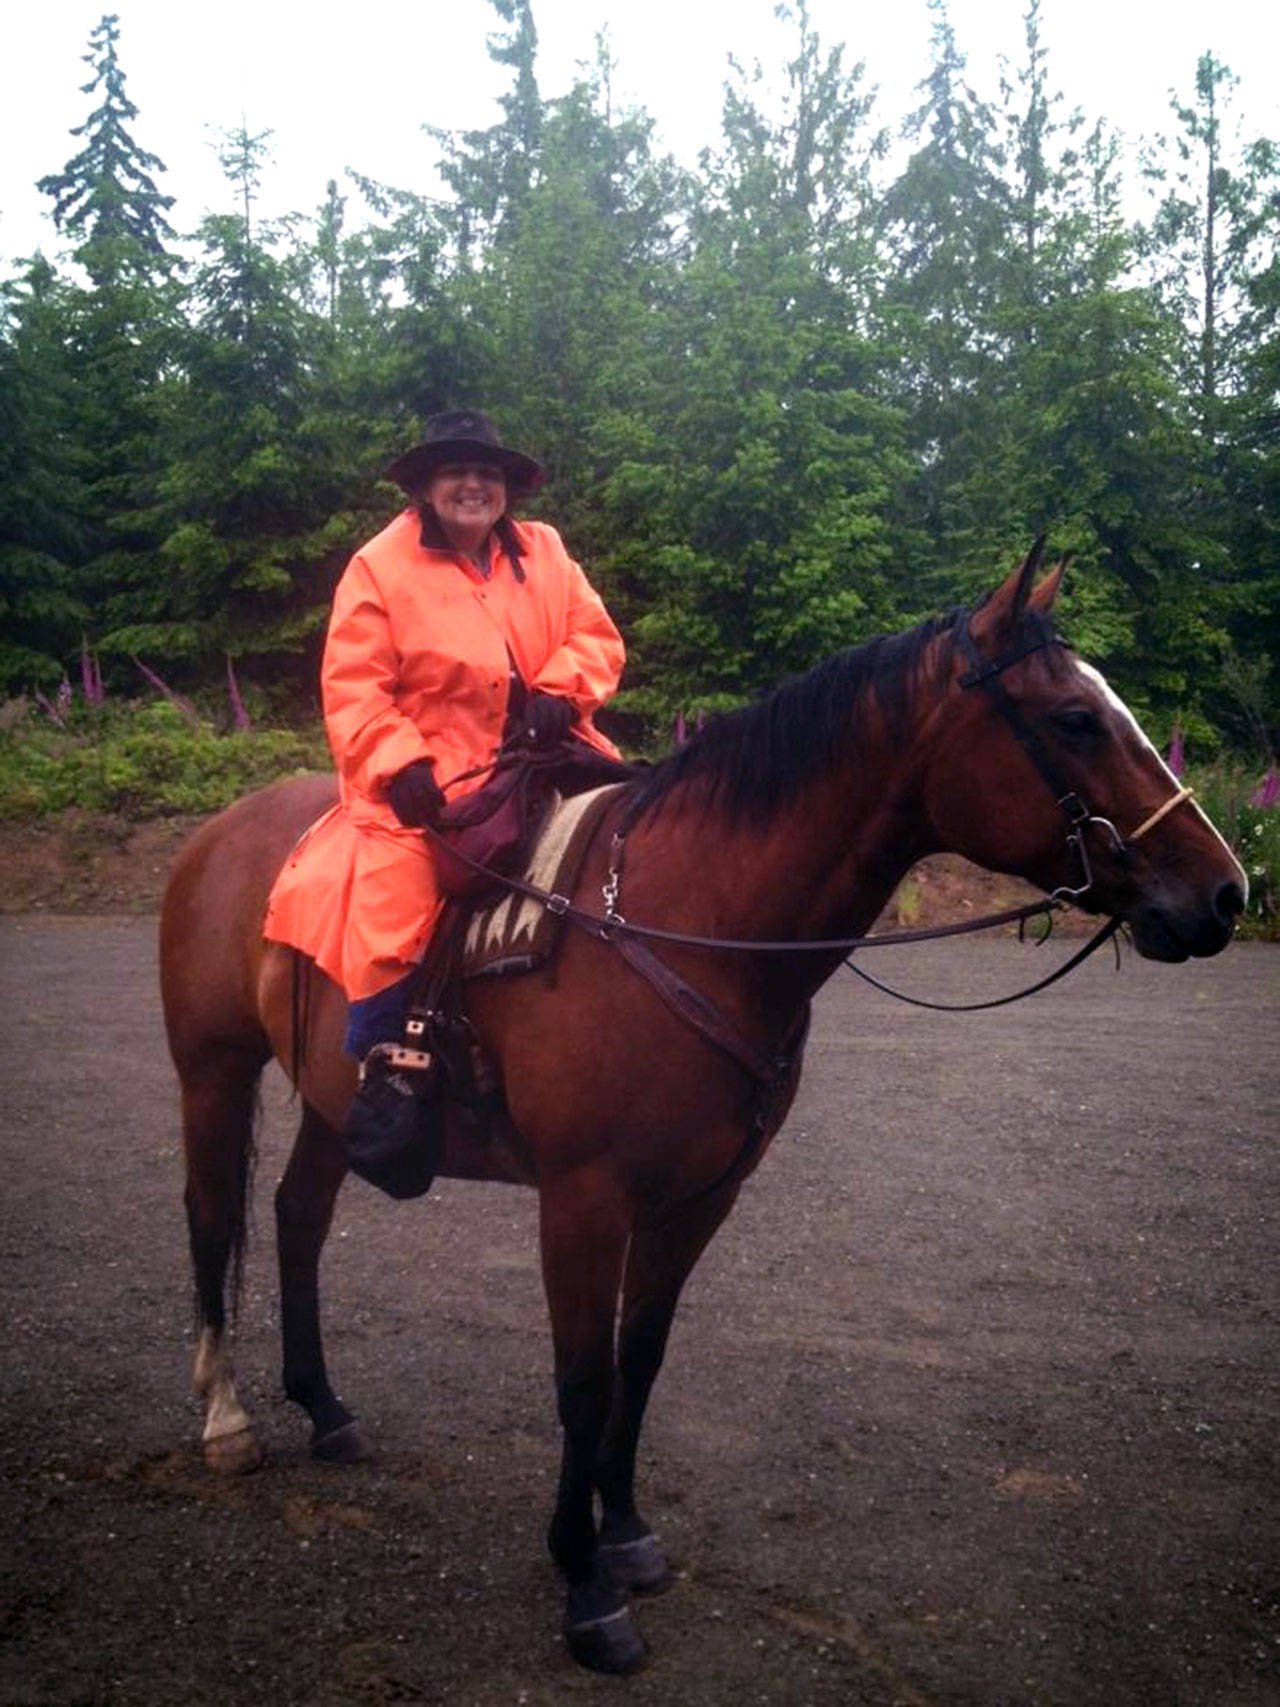 Karen Griffiths, riding Indy, head out on a rainy day to ride trails in the Cassidy Creek Department of Natural Resources. (Zorina Barker)